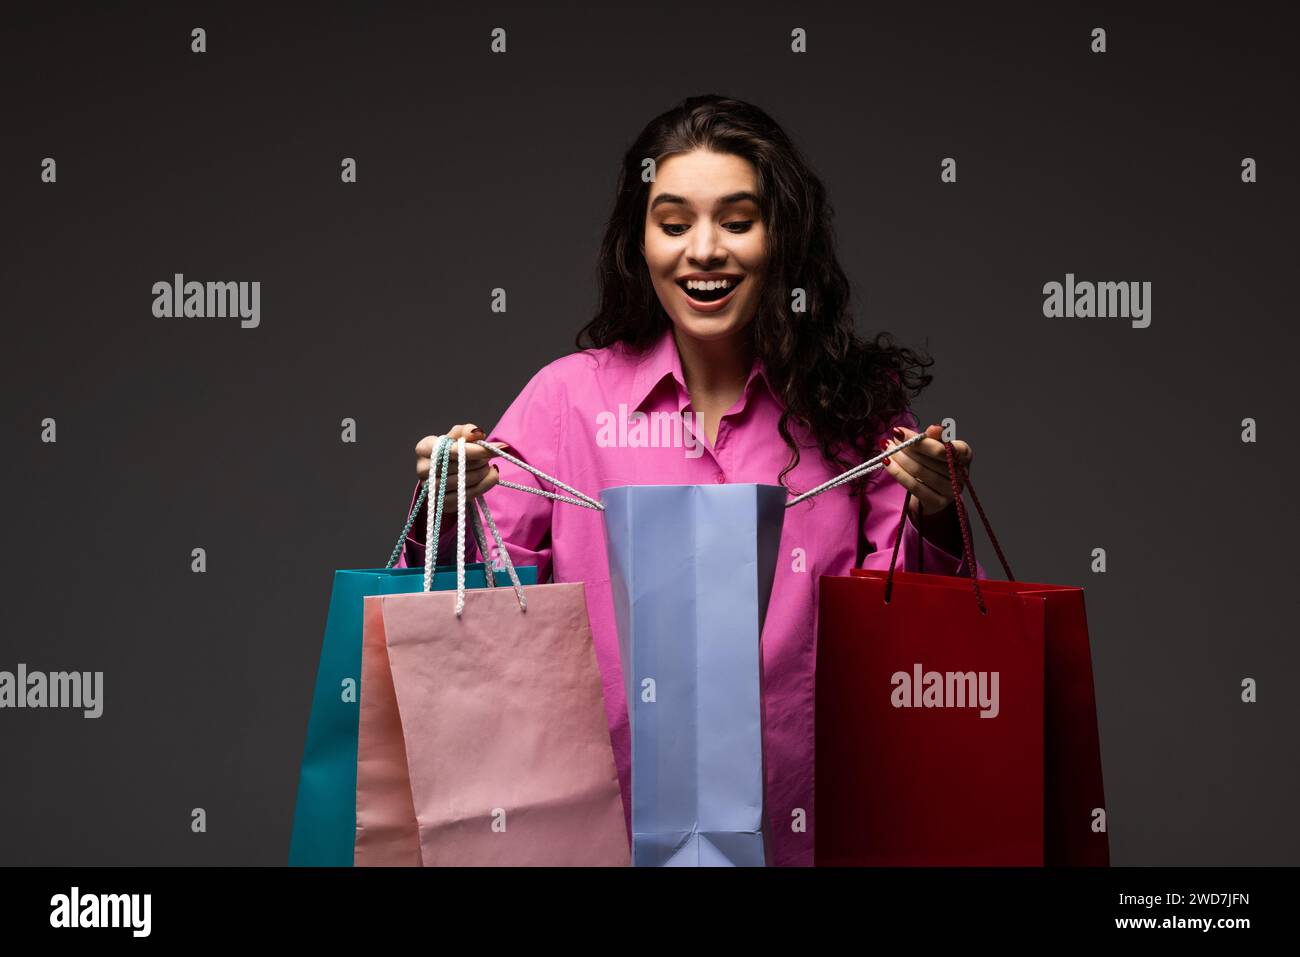 Woman holding shopping bags against a grey background Stock Photo